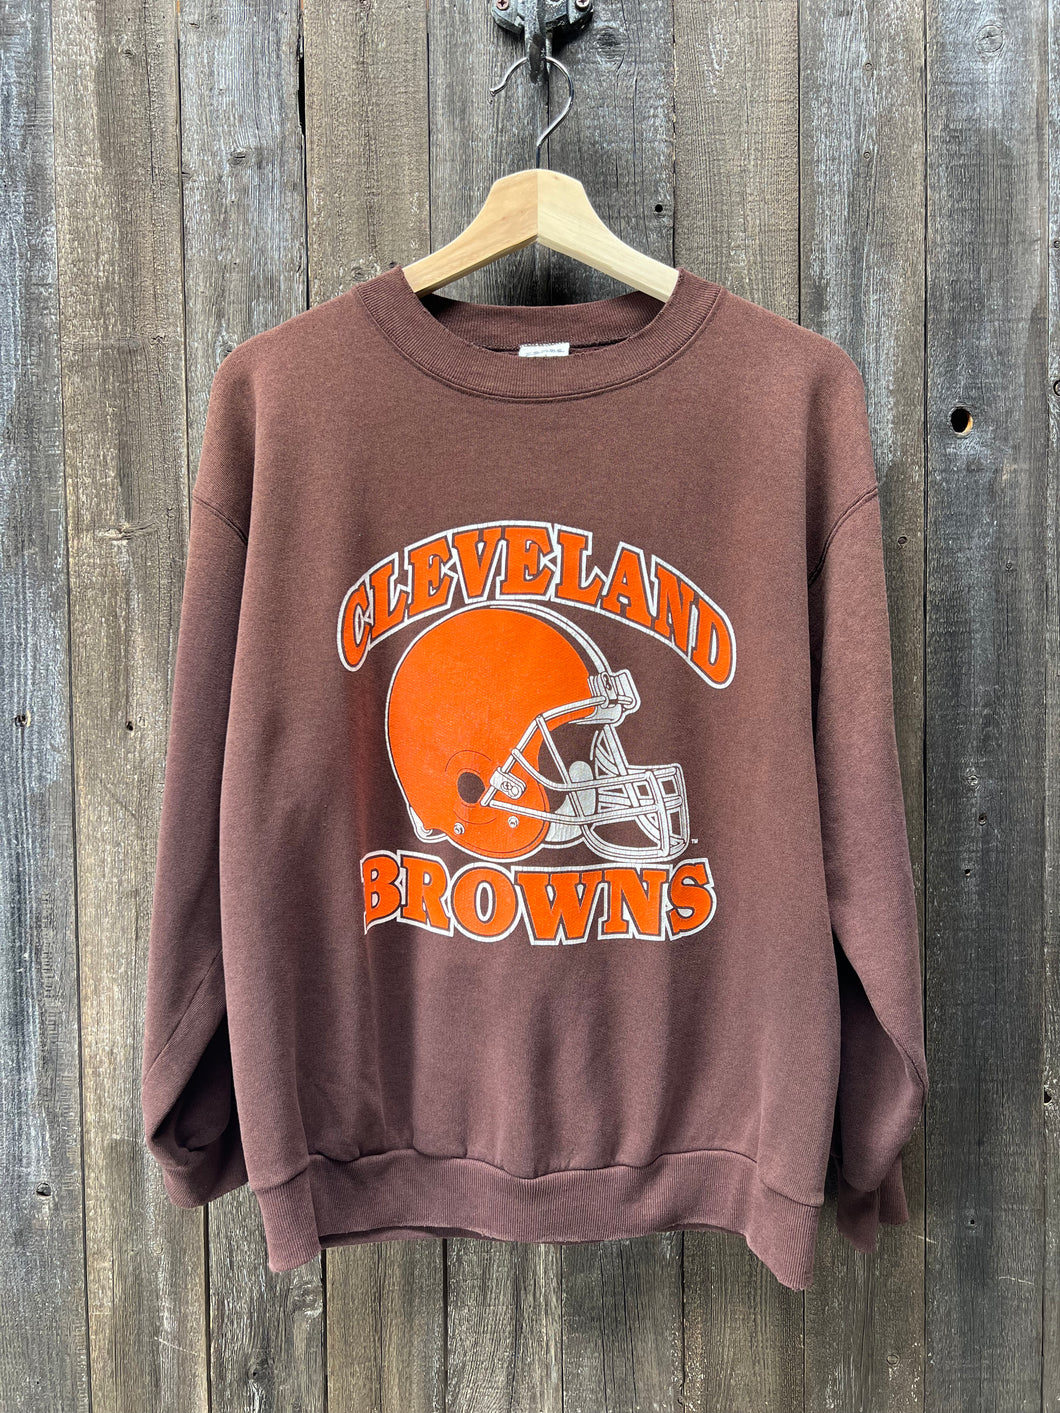 Cleveland Browns Sweatshirt -S/M-Customize Your Embroidery Wording